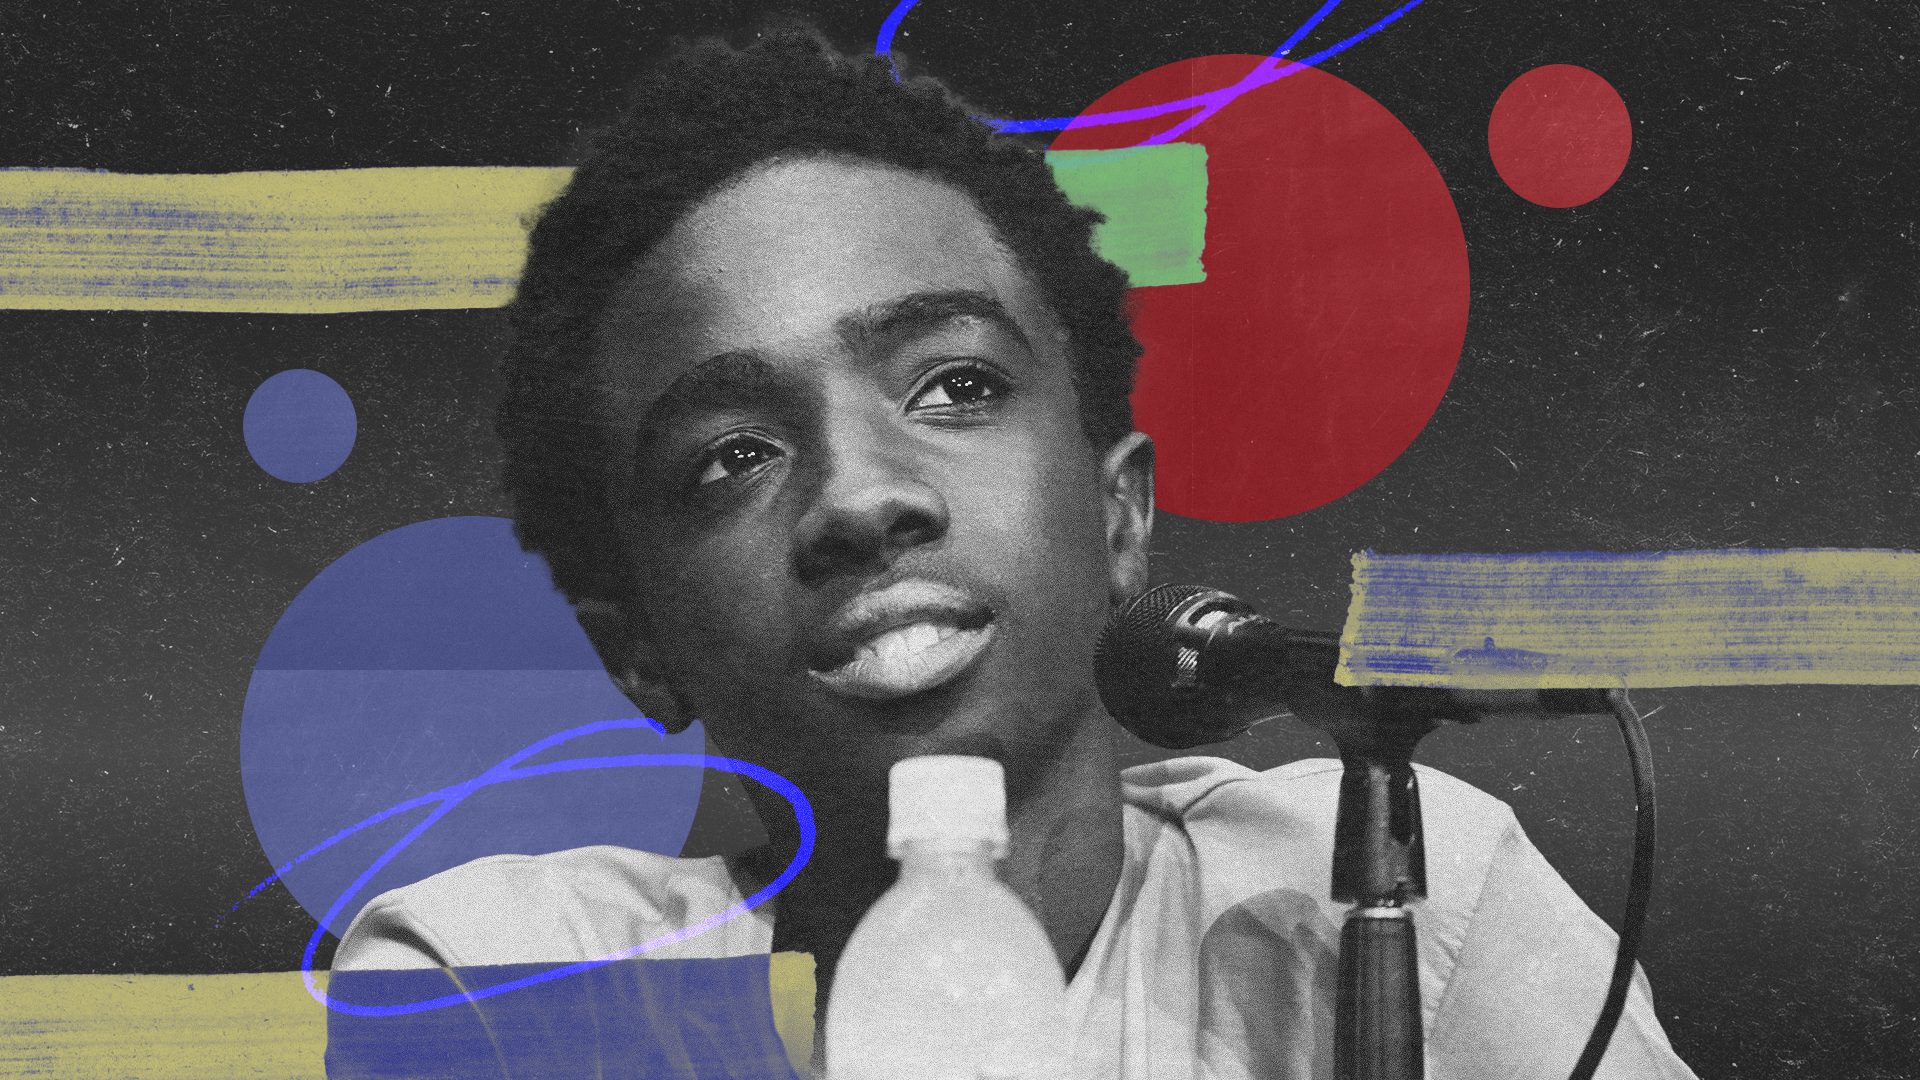 Caleb McLaughlin opens up about racist ‘Stranger Things’ fans